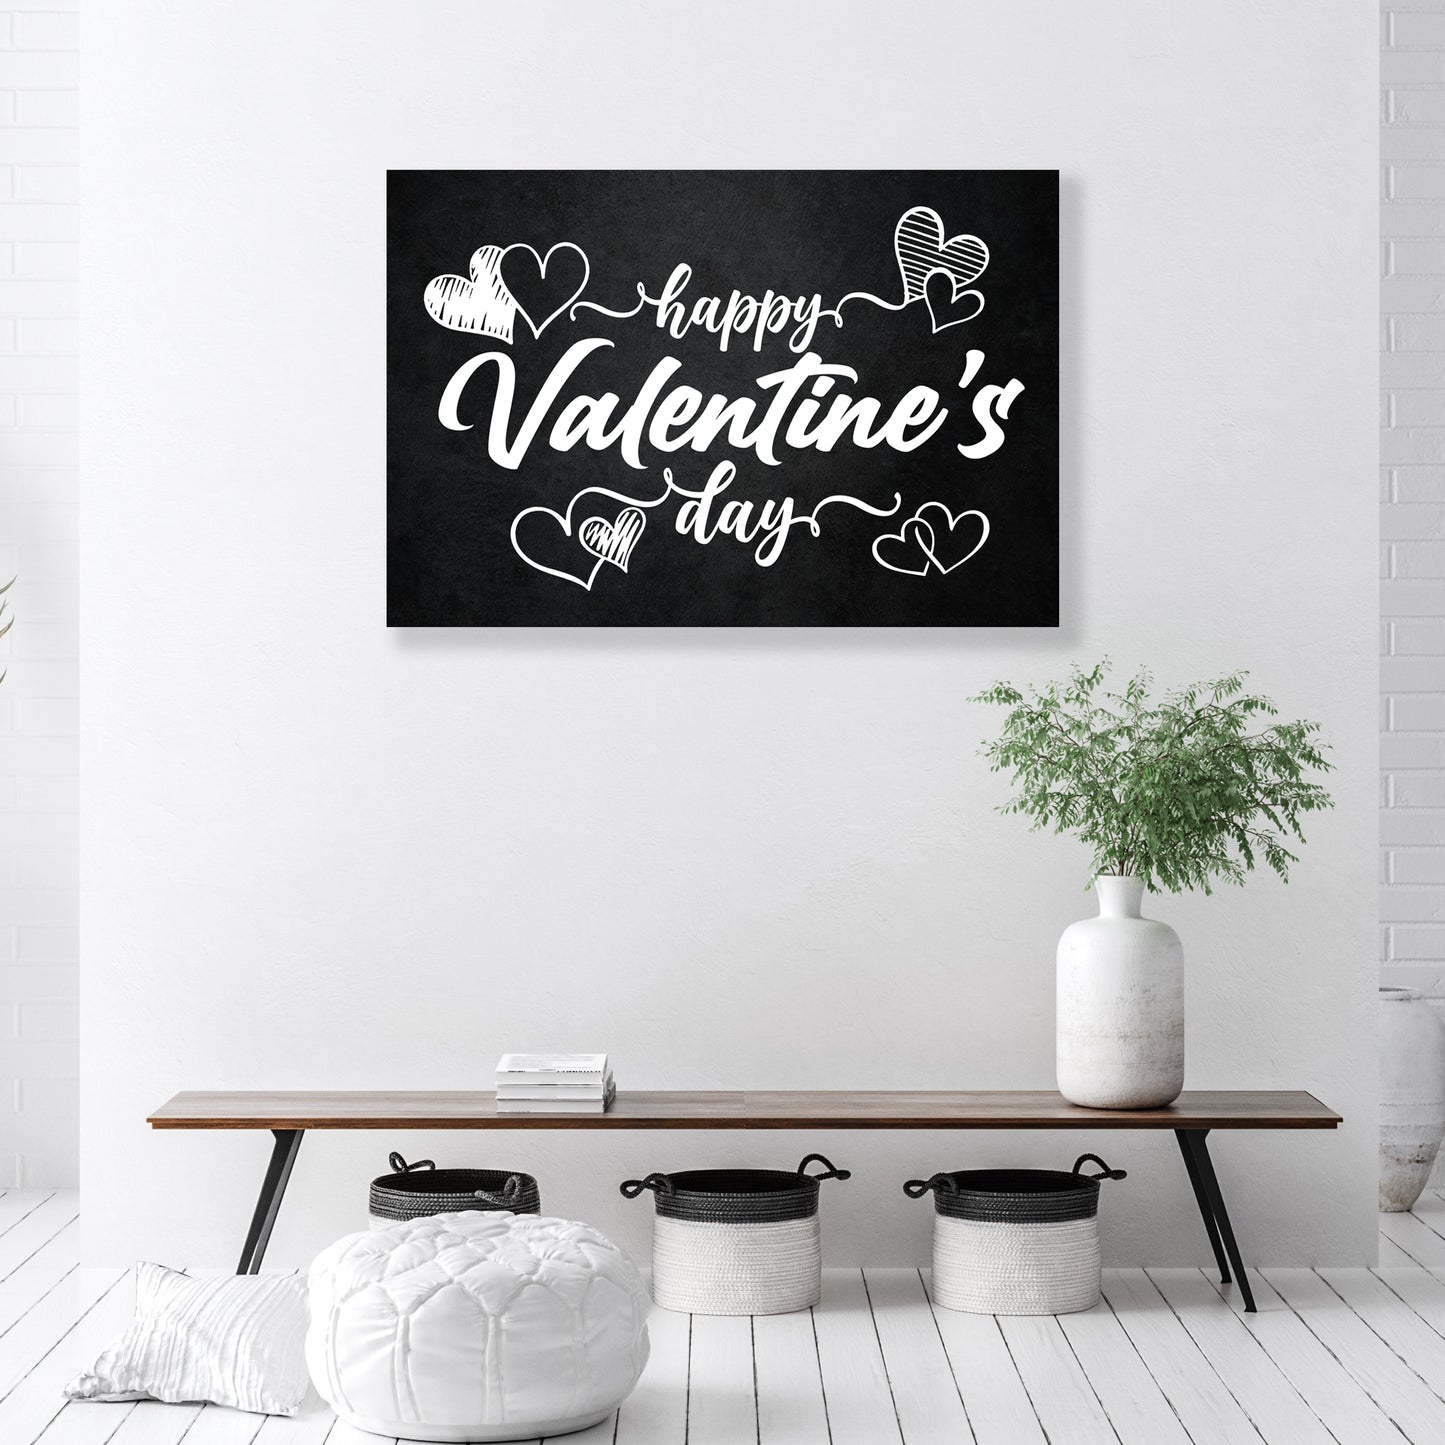 Valentine's Day Script Sign - Image by Tailored Canvases